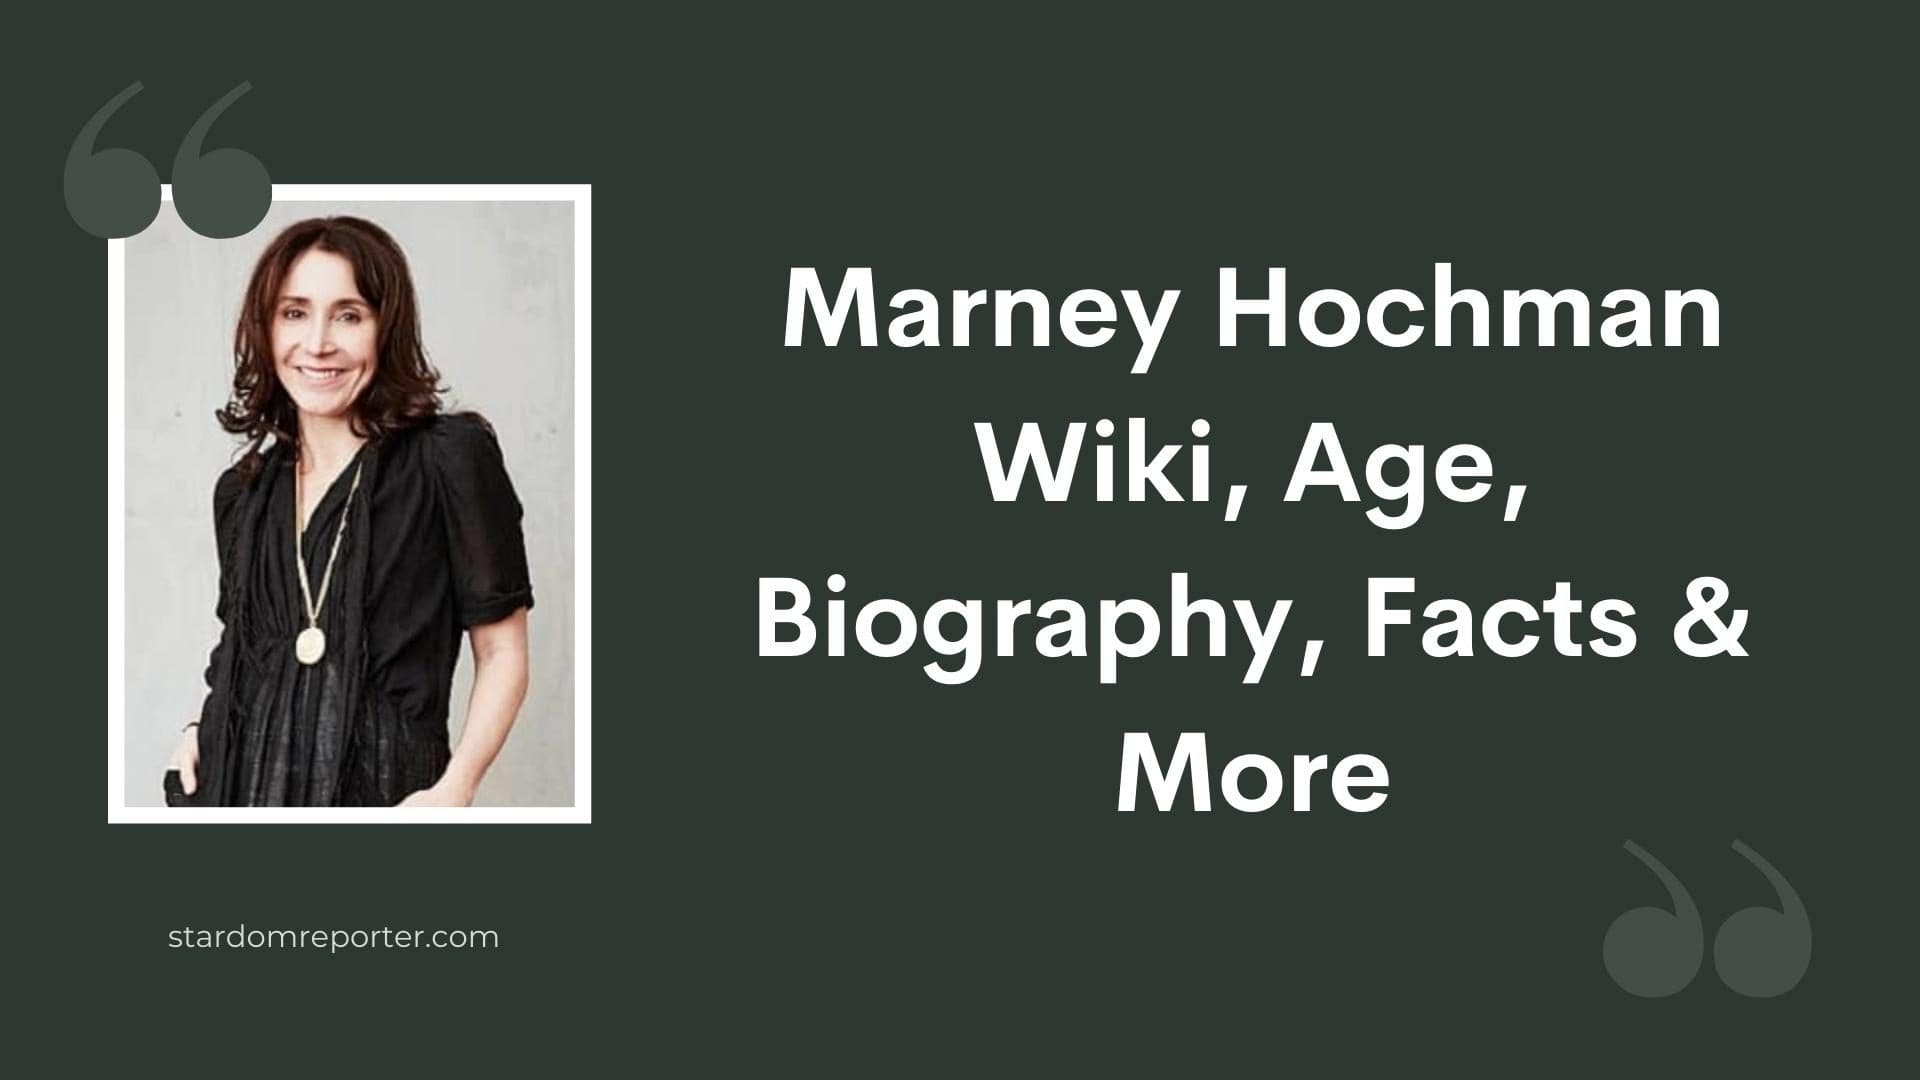 Marney Hochman Wiki, Age, Biography, Facts & More - 19